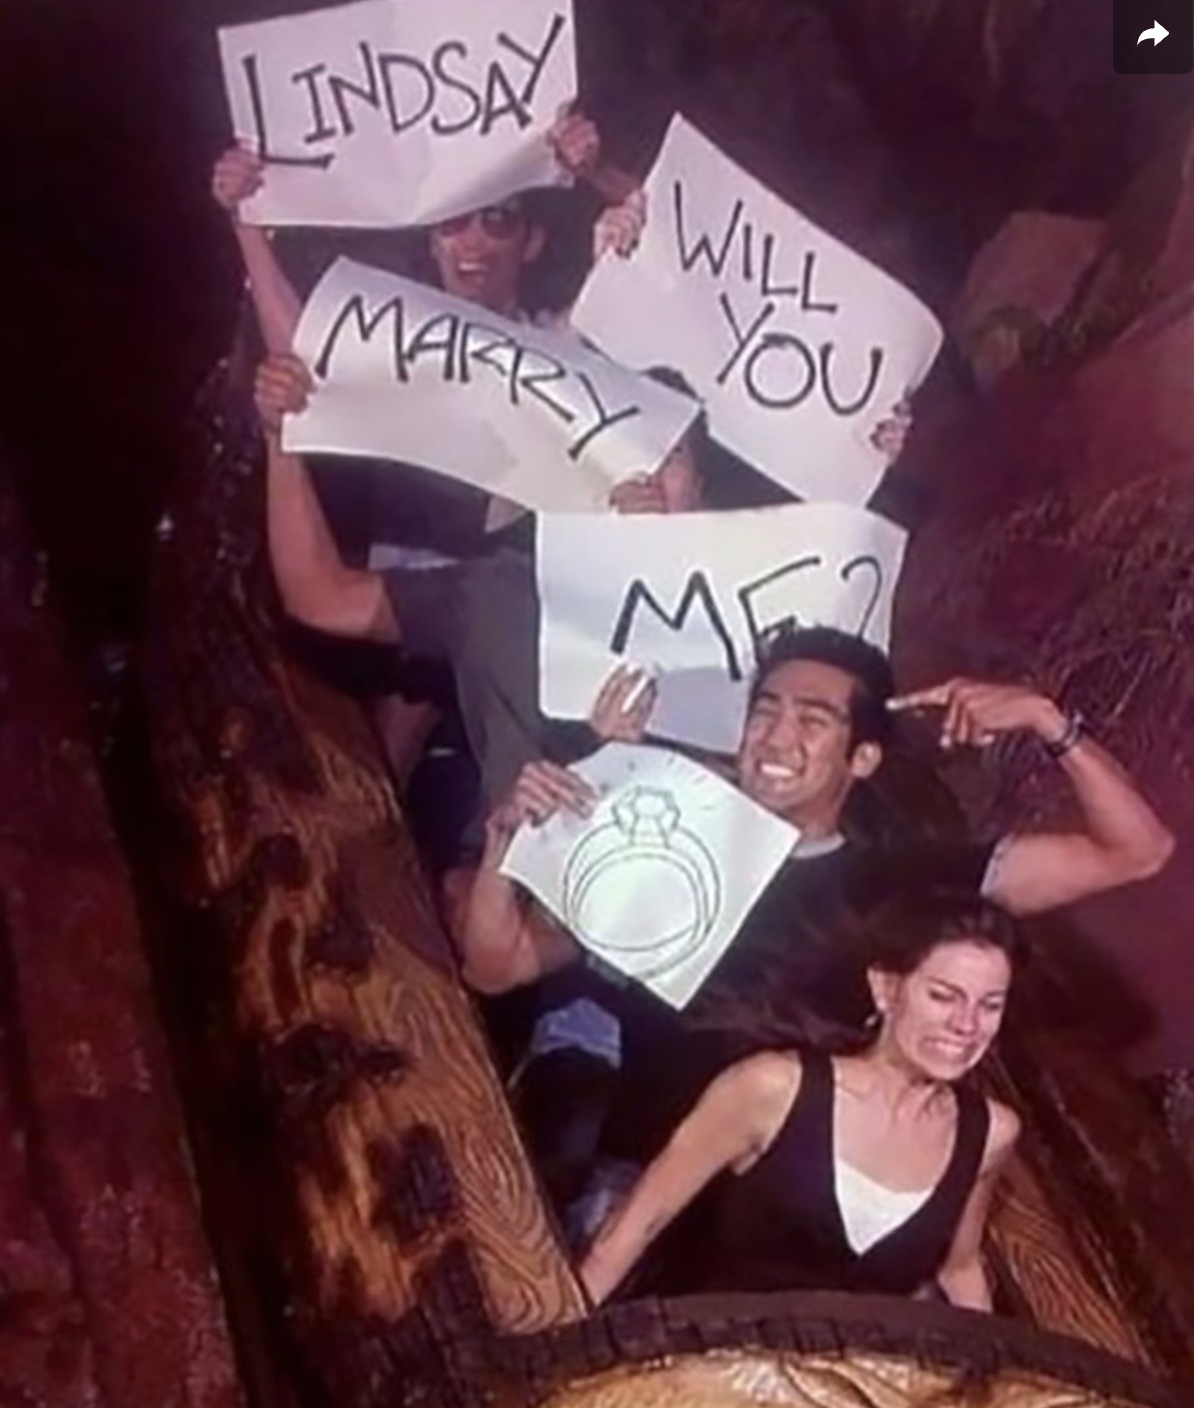 splash mountain picture ideas - Lindsay Makky Will You Me?